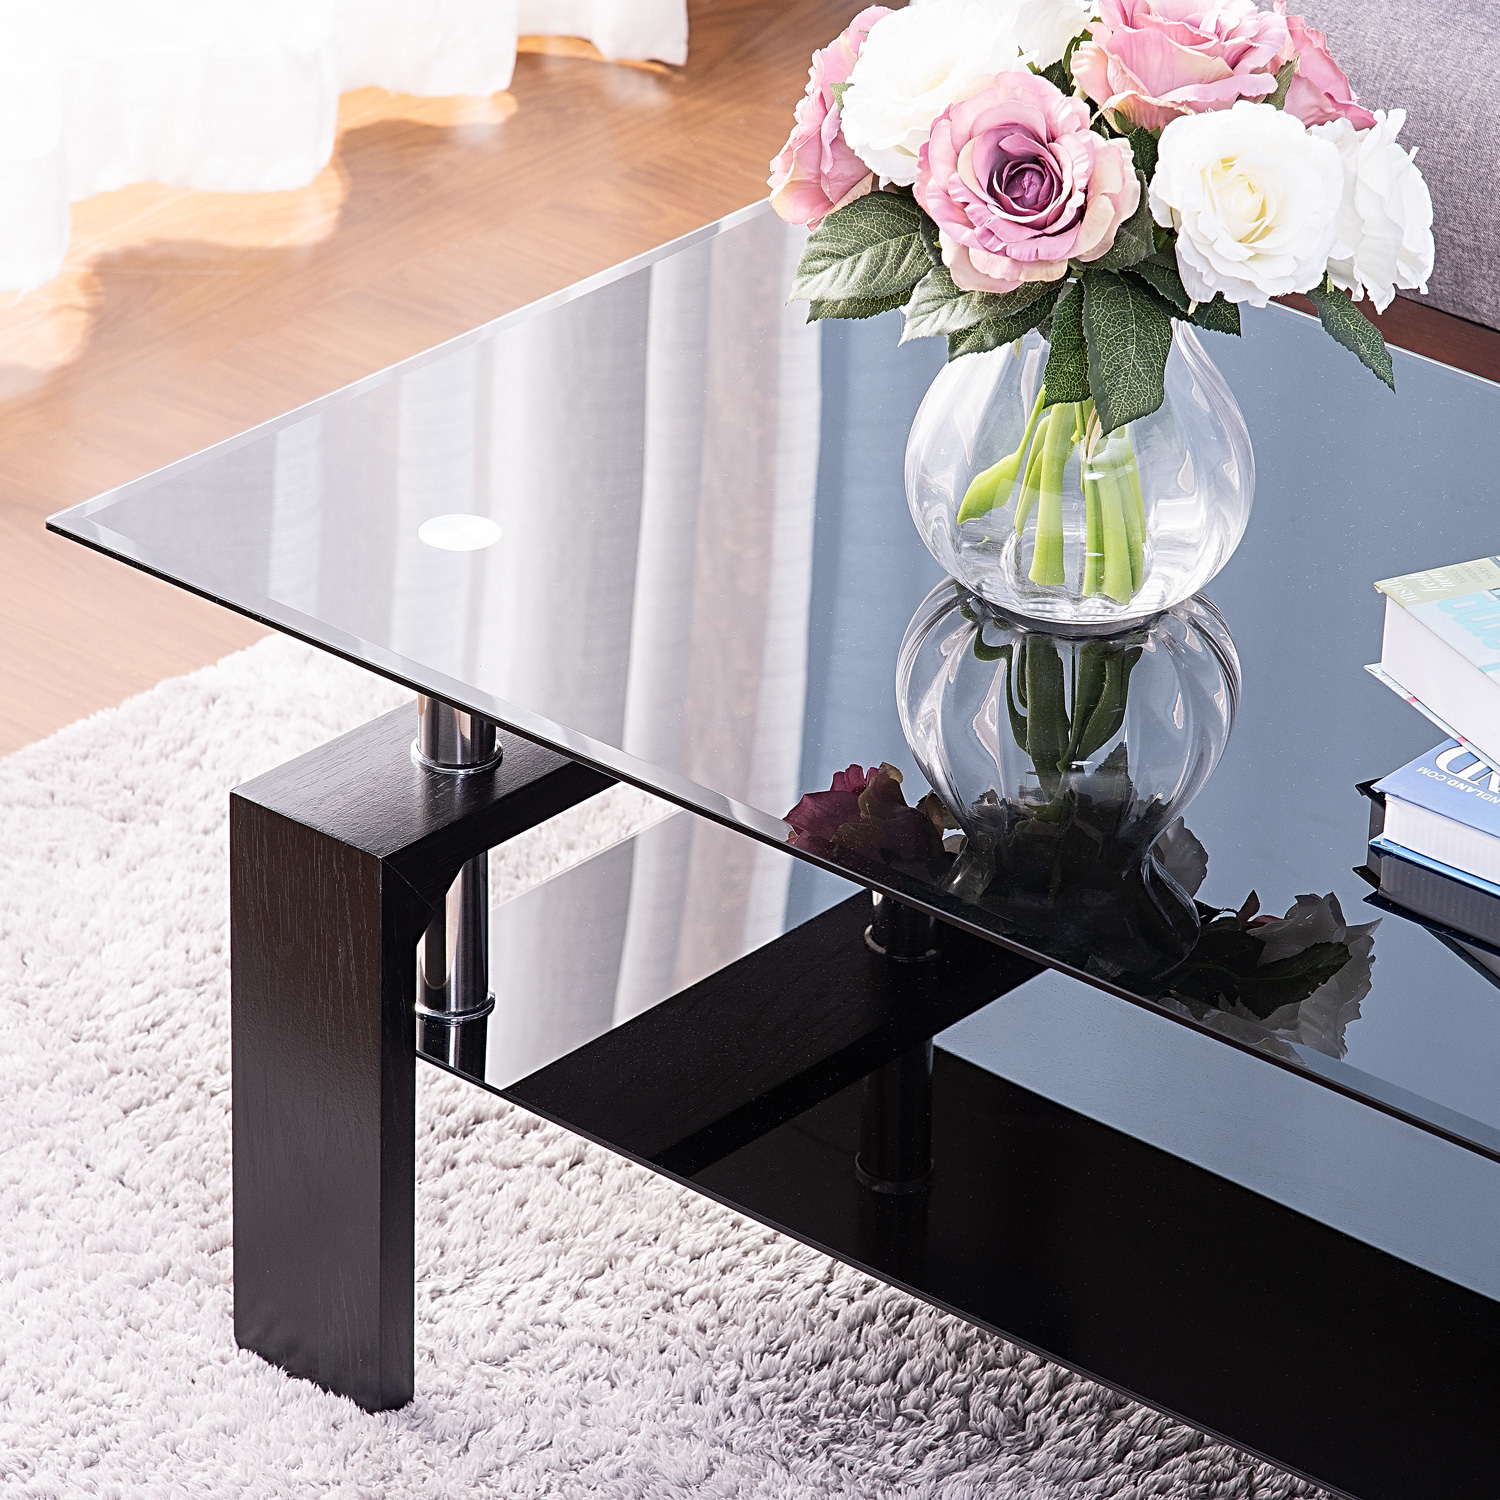 Rectangle Glass Coffee Table, Modern Side Center Table with Shelf & Wood Legs, Mid-Century Tempered Glass Top Tea Table for Living Room, Home Furniture Cocktail Coffee Table - Black, B1257 - image 4 of 8